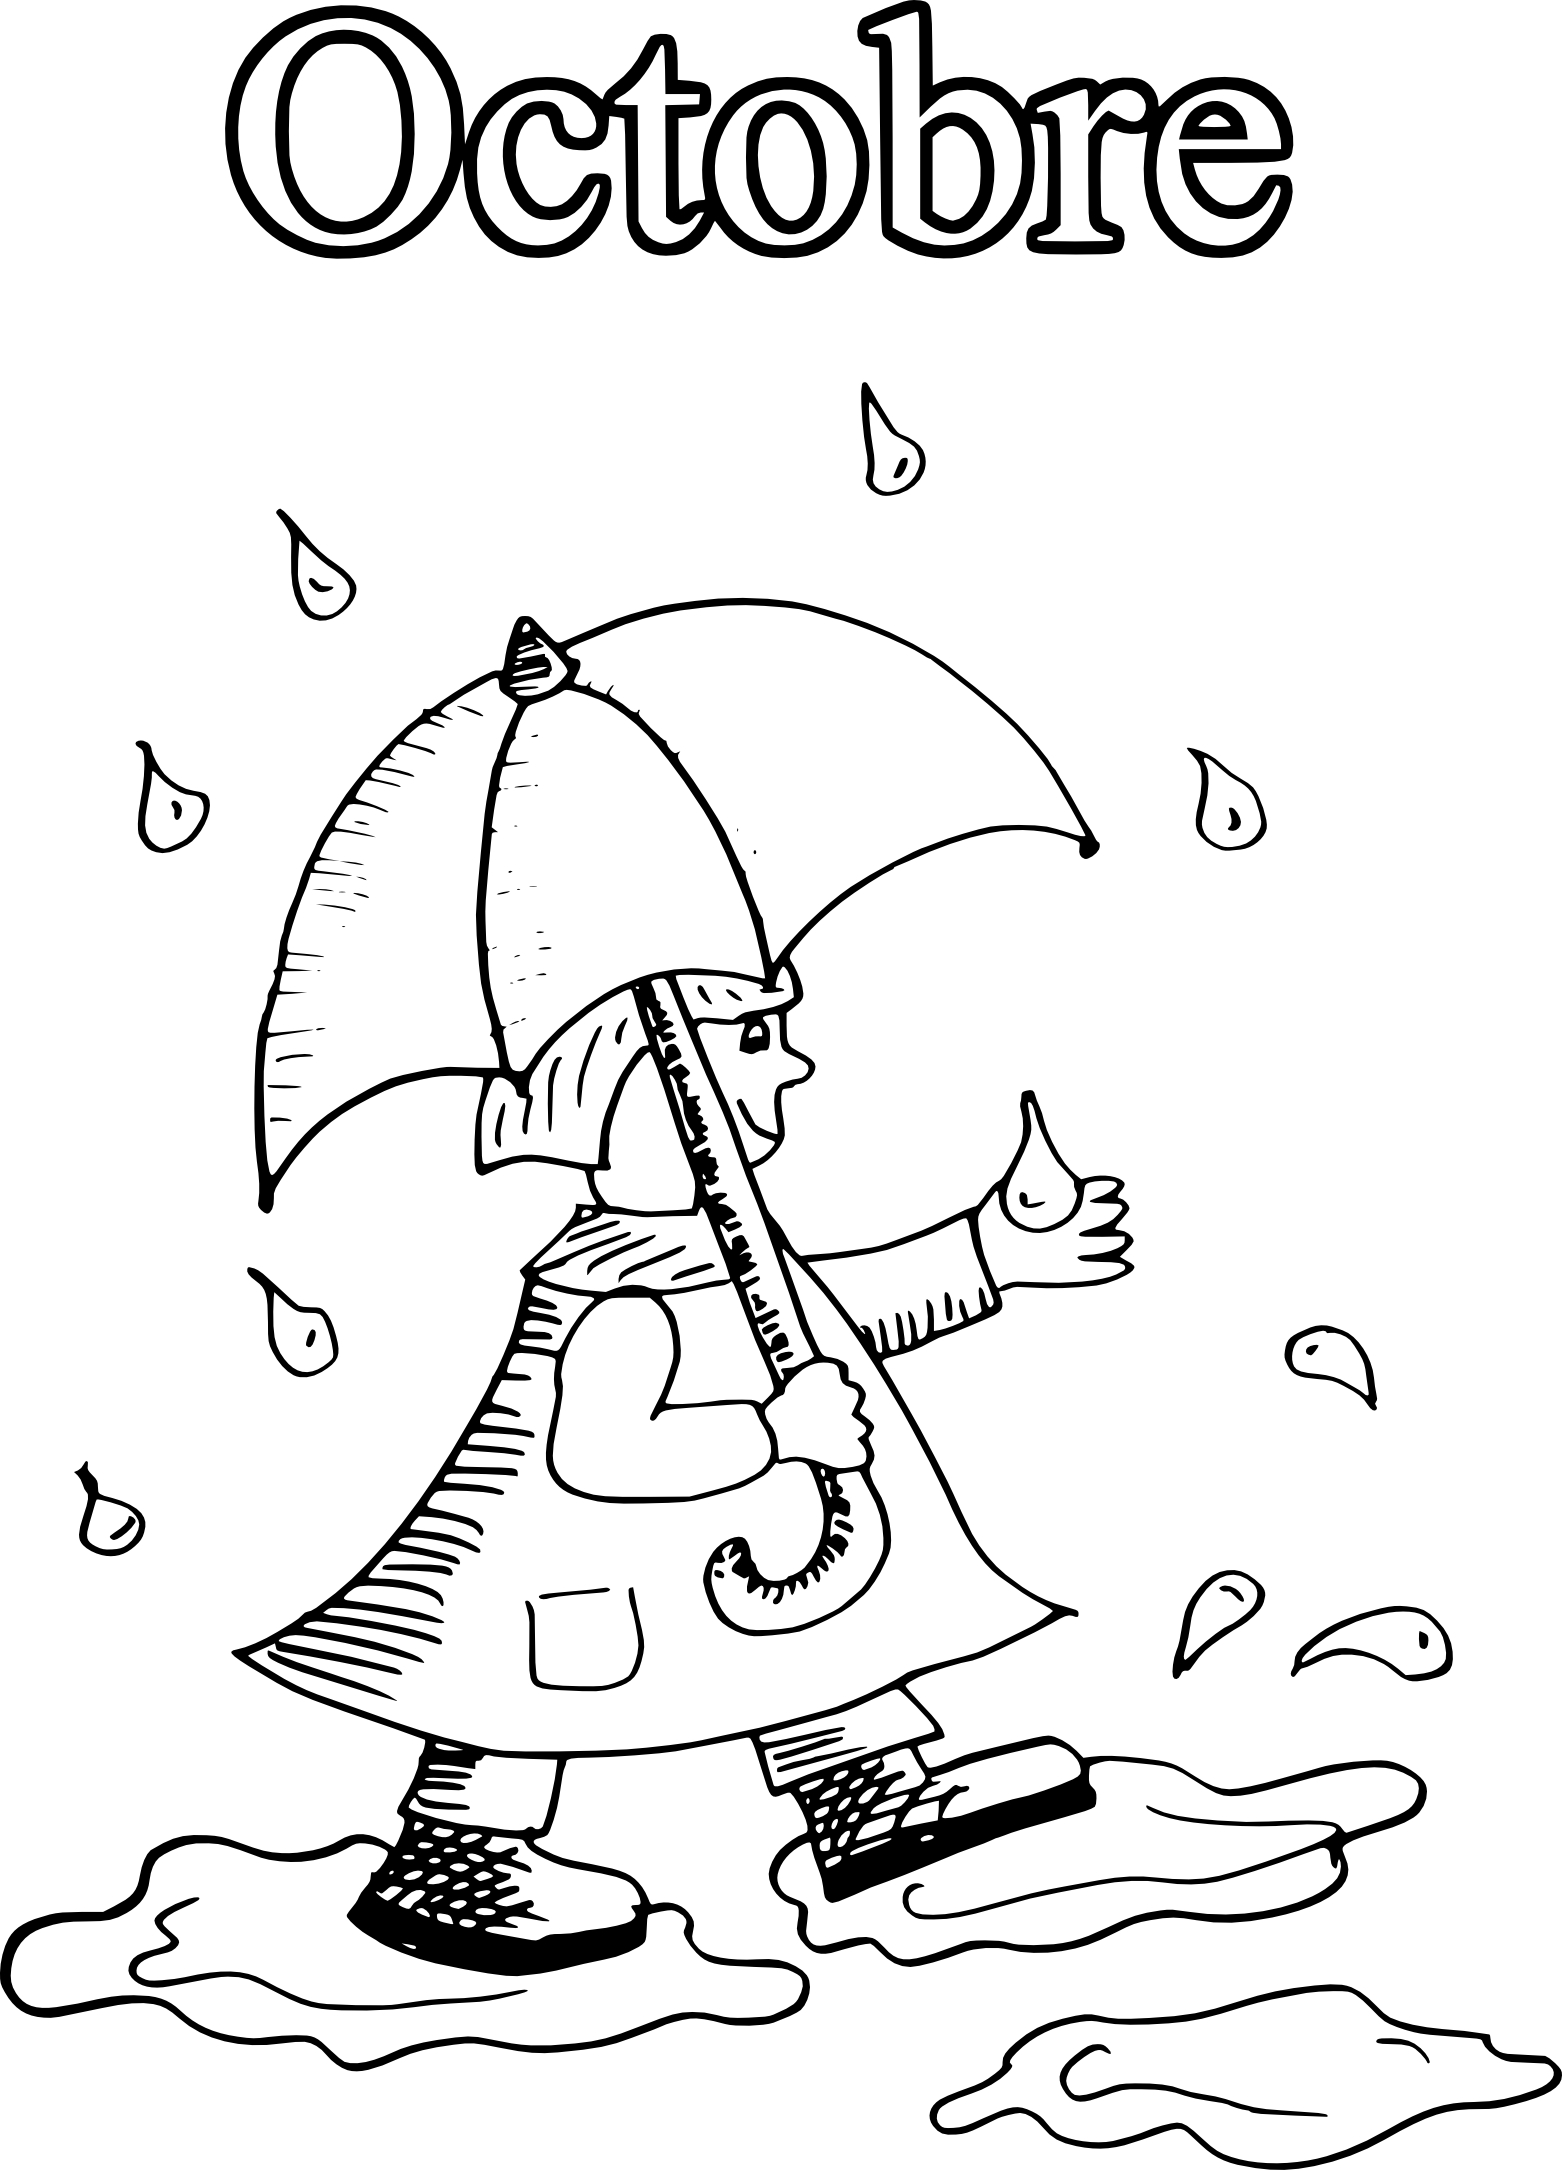 Month Of October coloring page